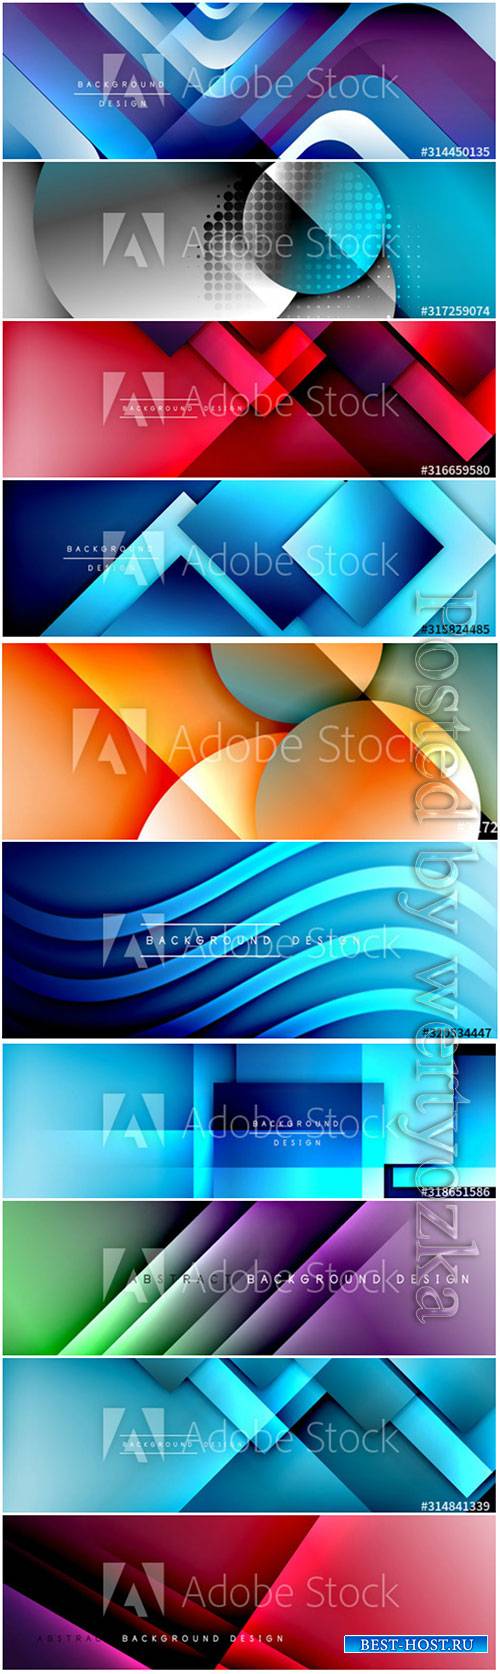 Geometric abstract background 3D effects vector illustrations